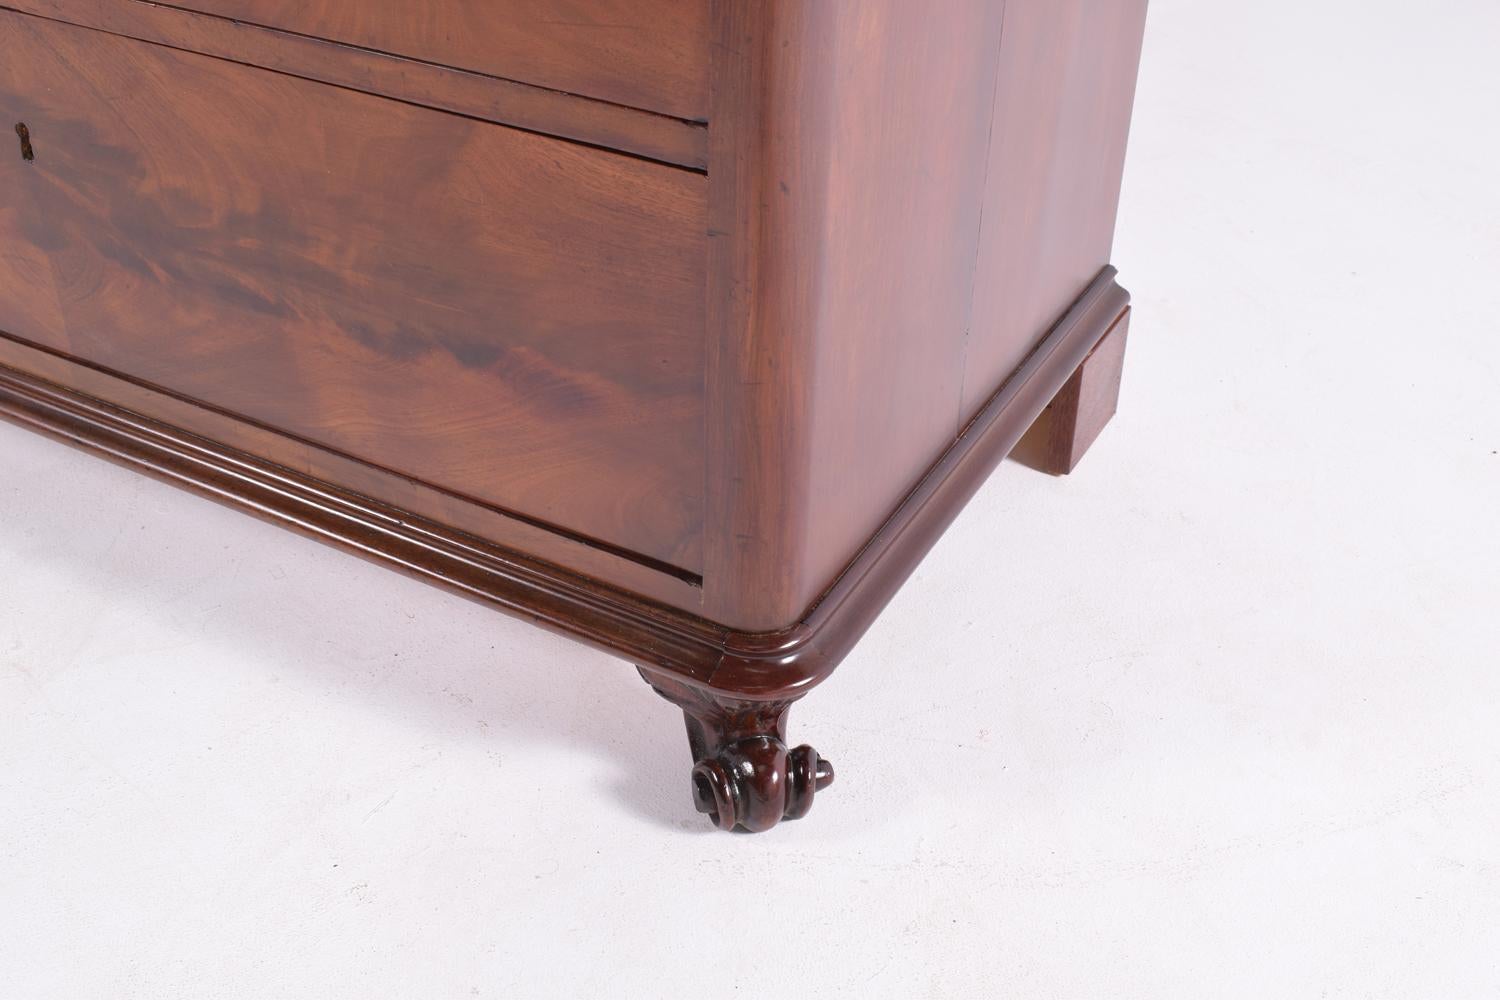 Danish Mid-19th Century Biedermeier Commode Tall Chest of Drawers 3